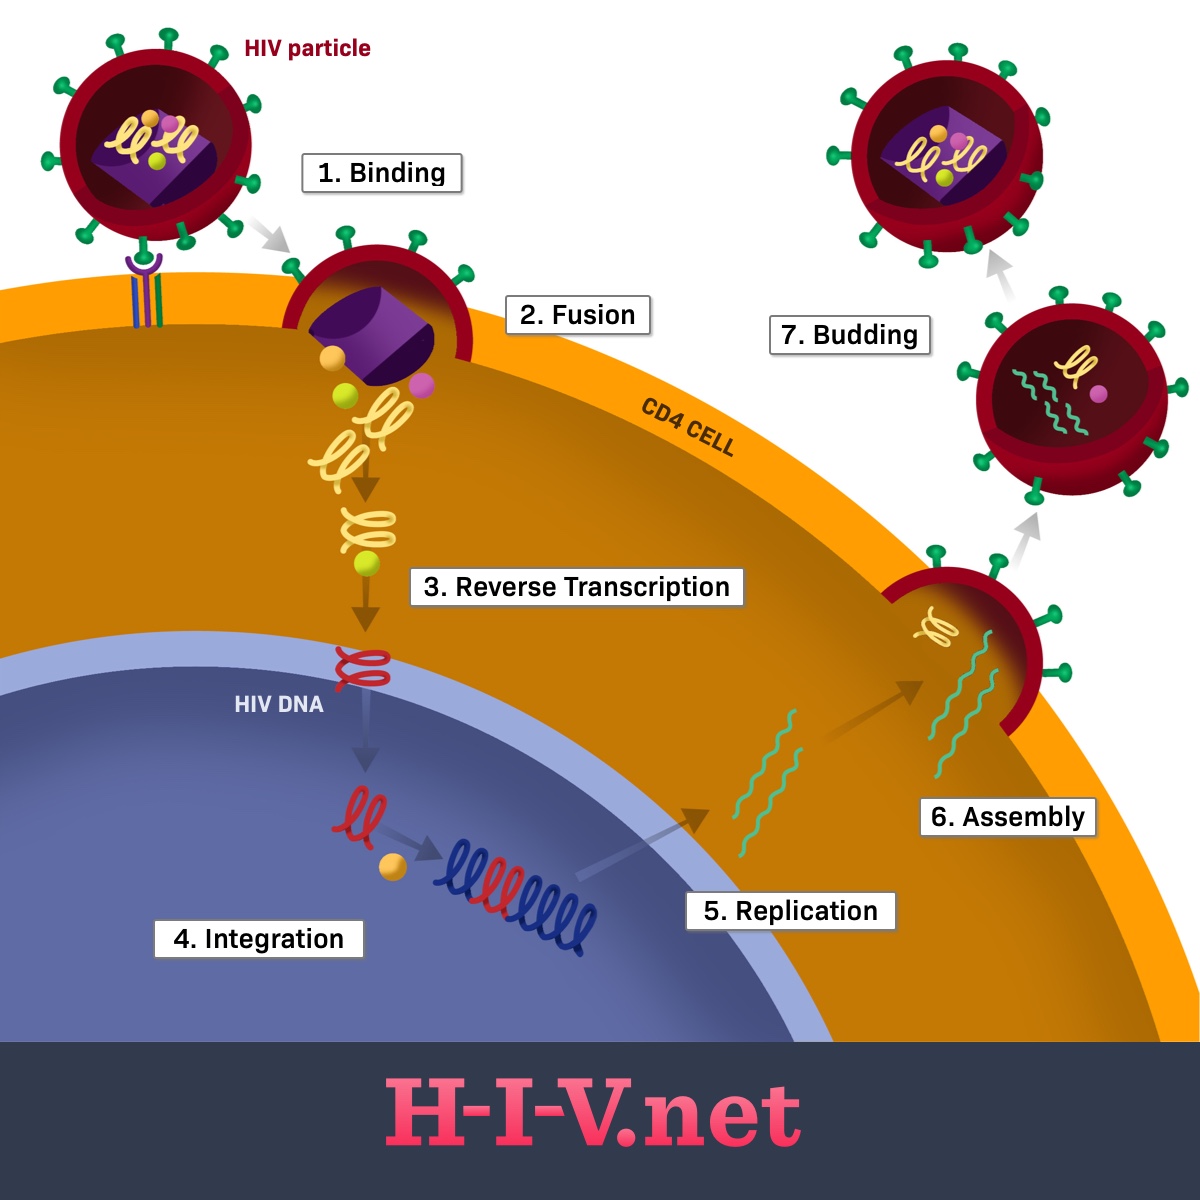 Steps of the HIV life cycle: binding, fusion, reverse transcription, integration, replication, assembly, and budding